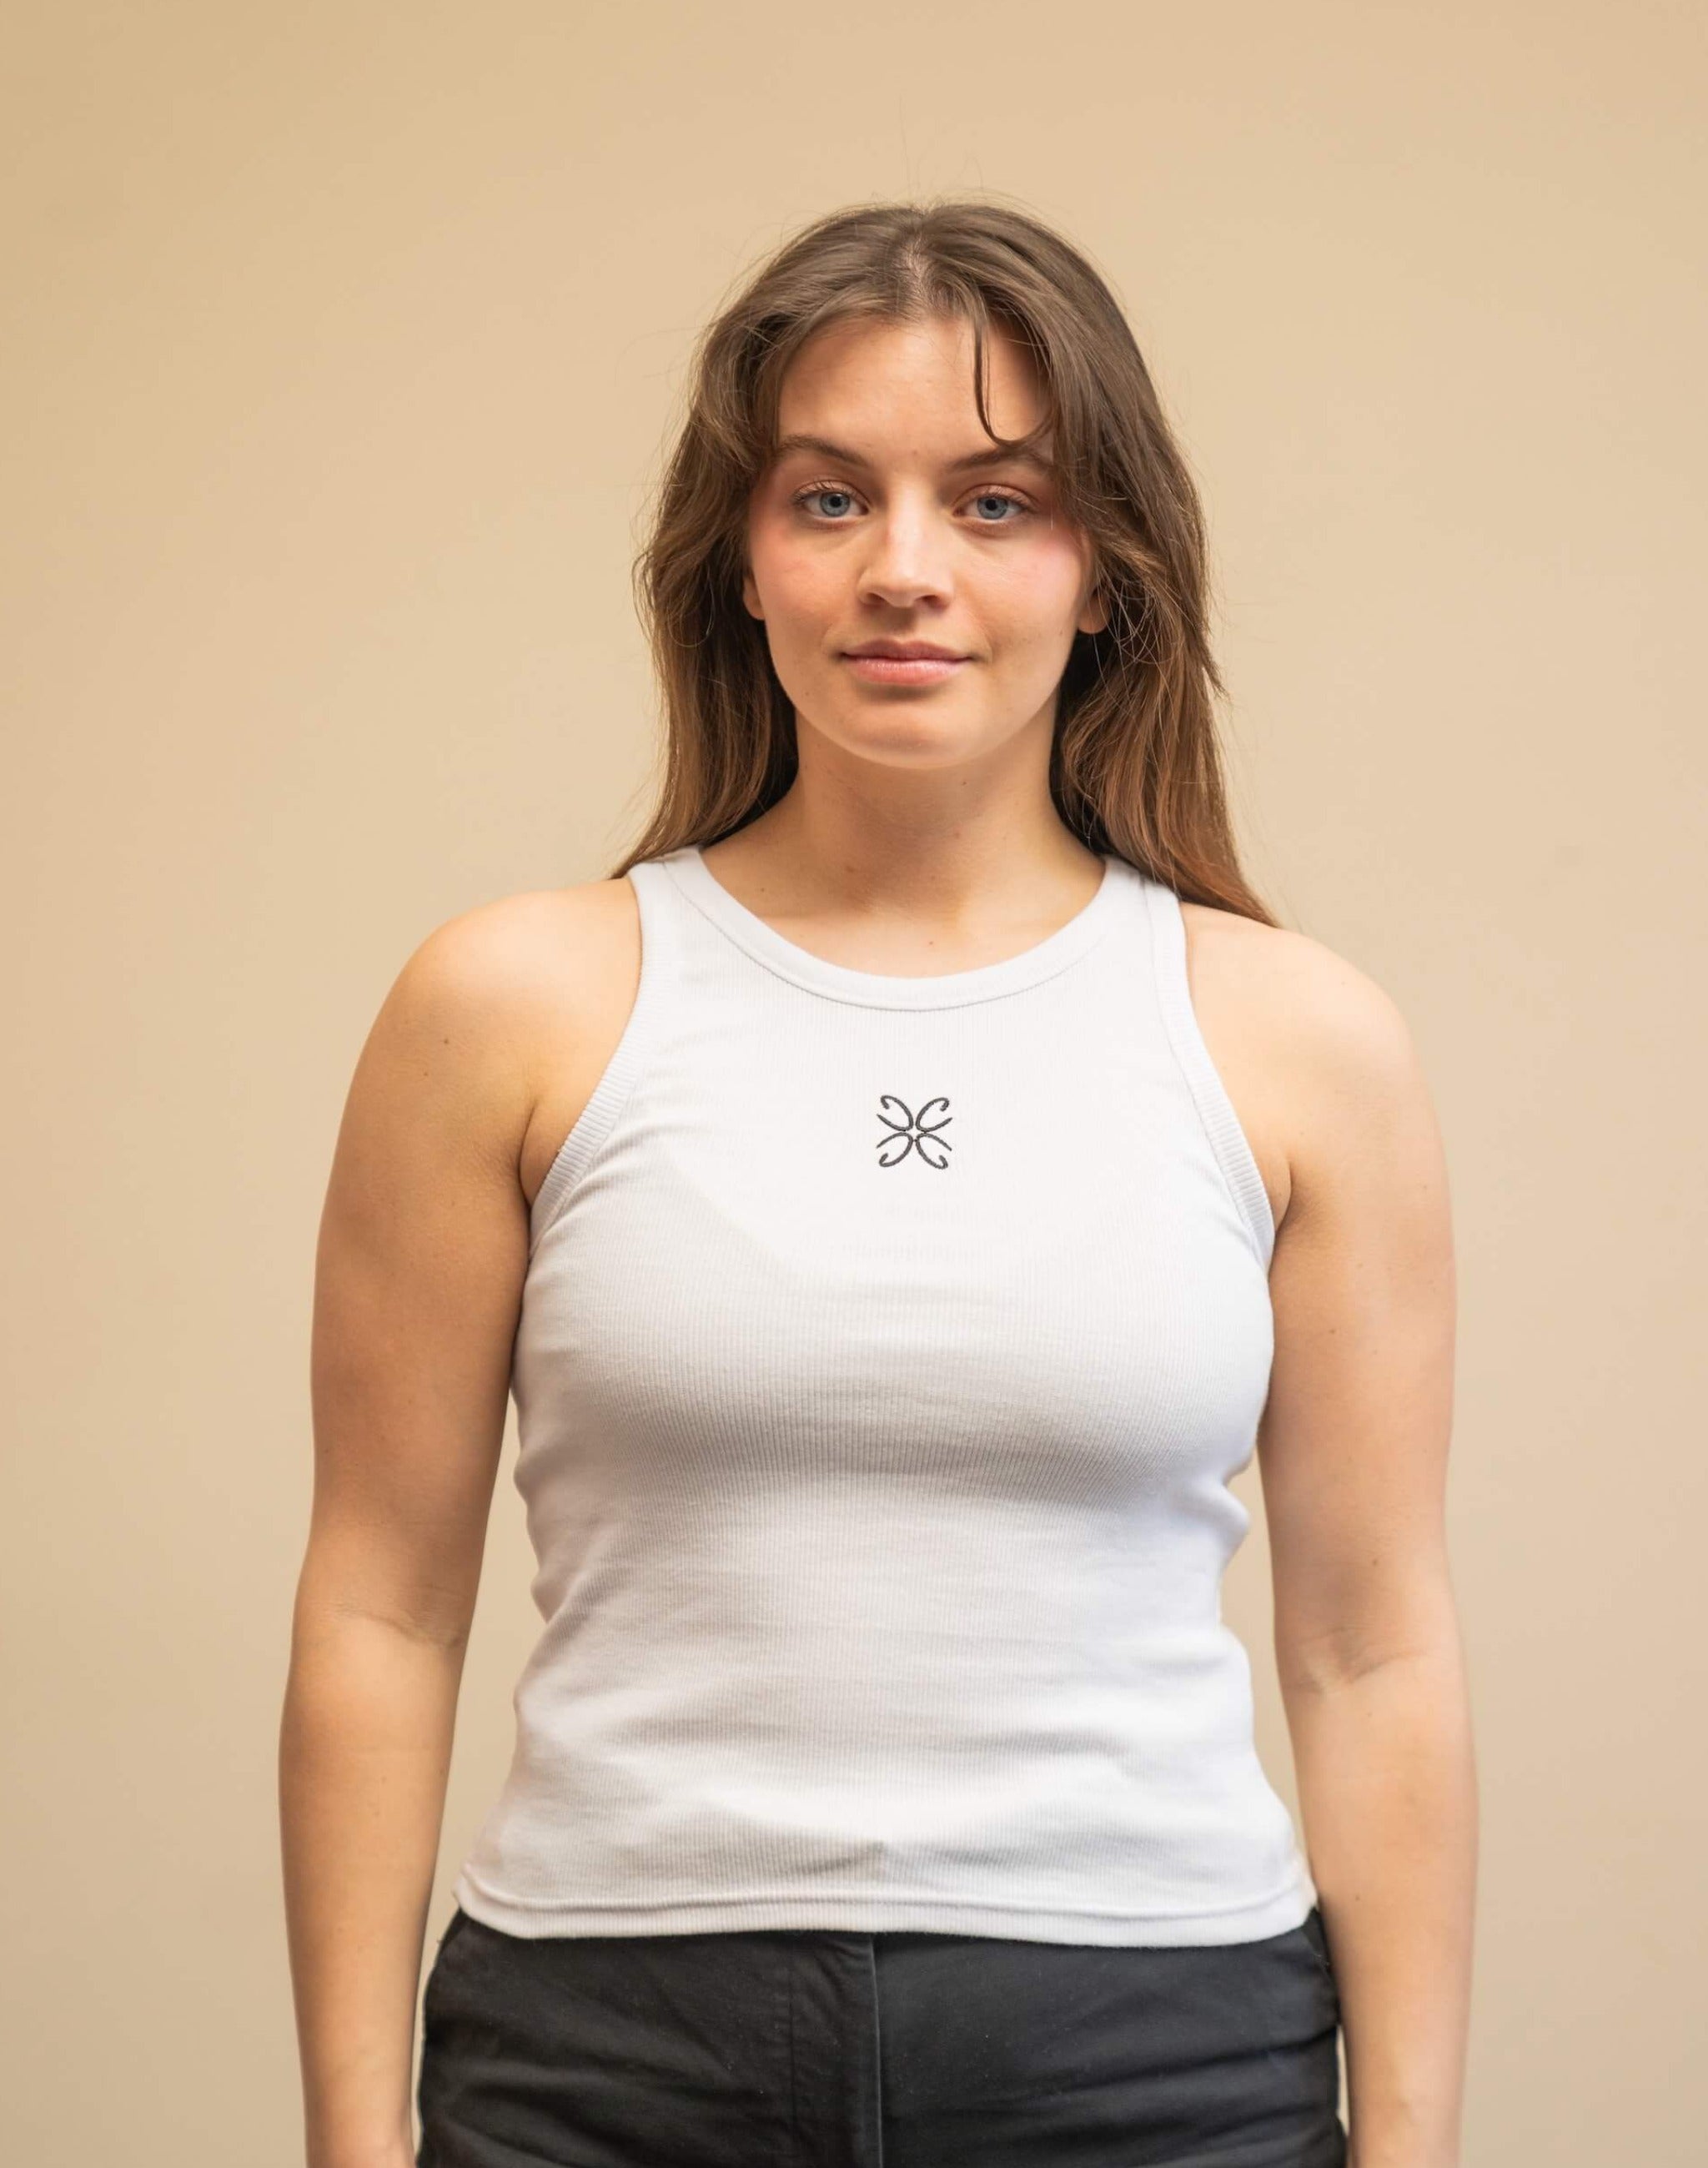 Woman wearing a white tank top from Cyme Copenhagen's spring/summer collection. The tank top features a simple design with a black logo in the center. The model stands against a neutral background, emphasizing the minimalist and stylish appeal of the garment.